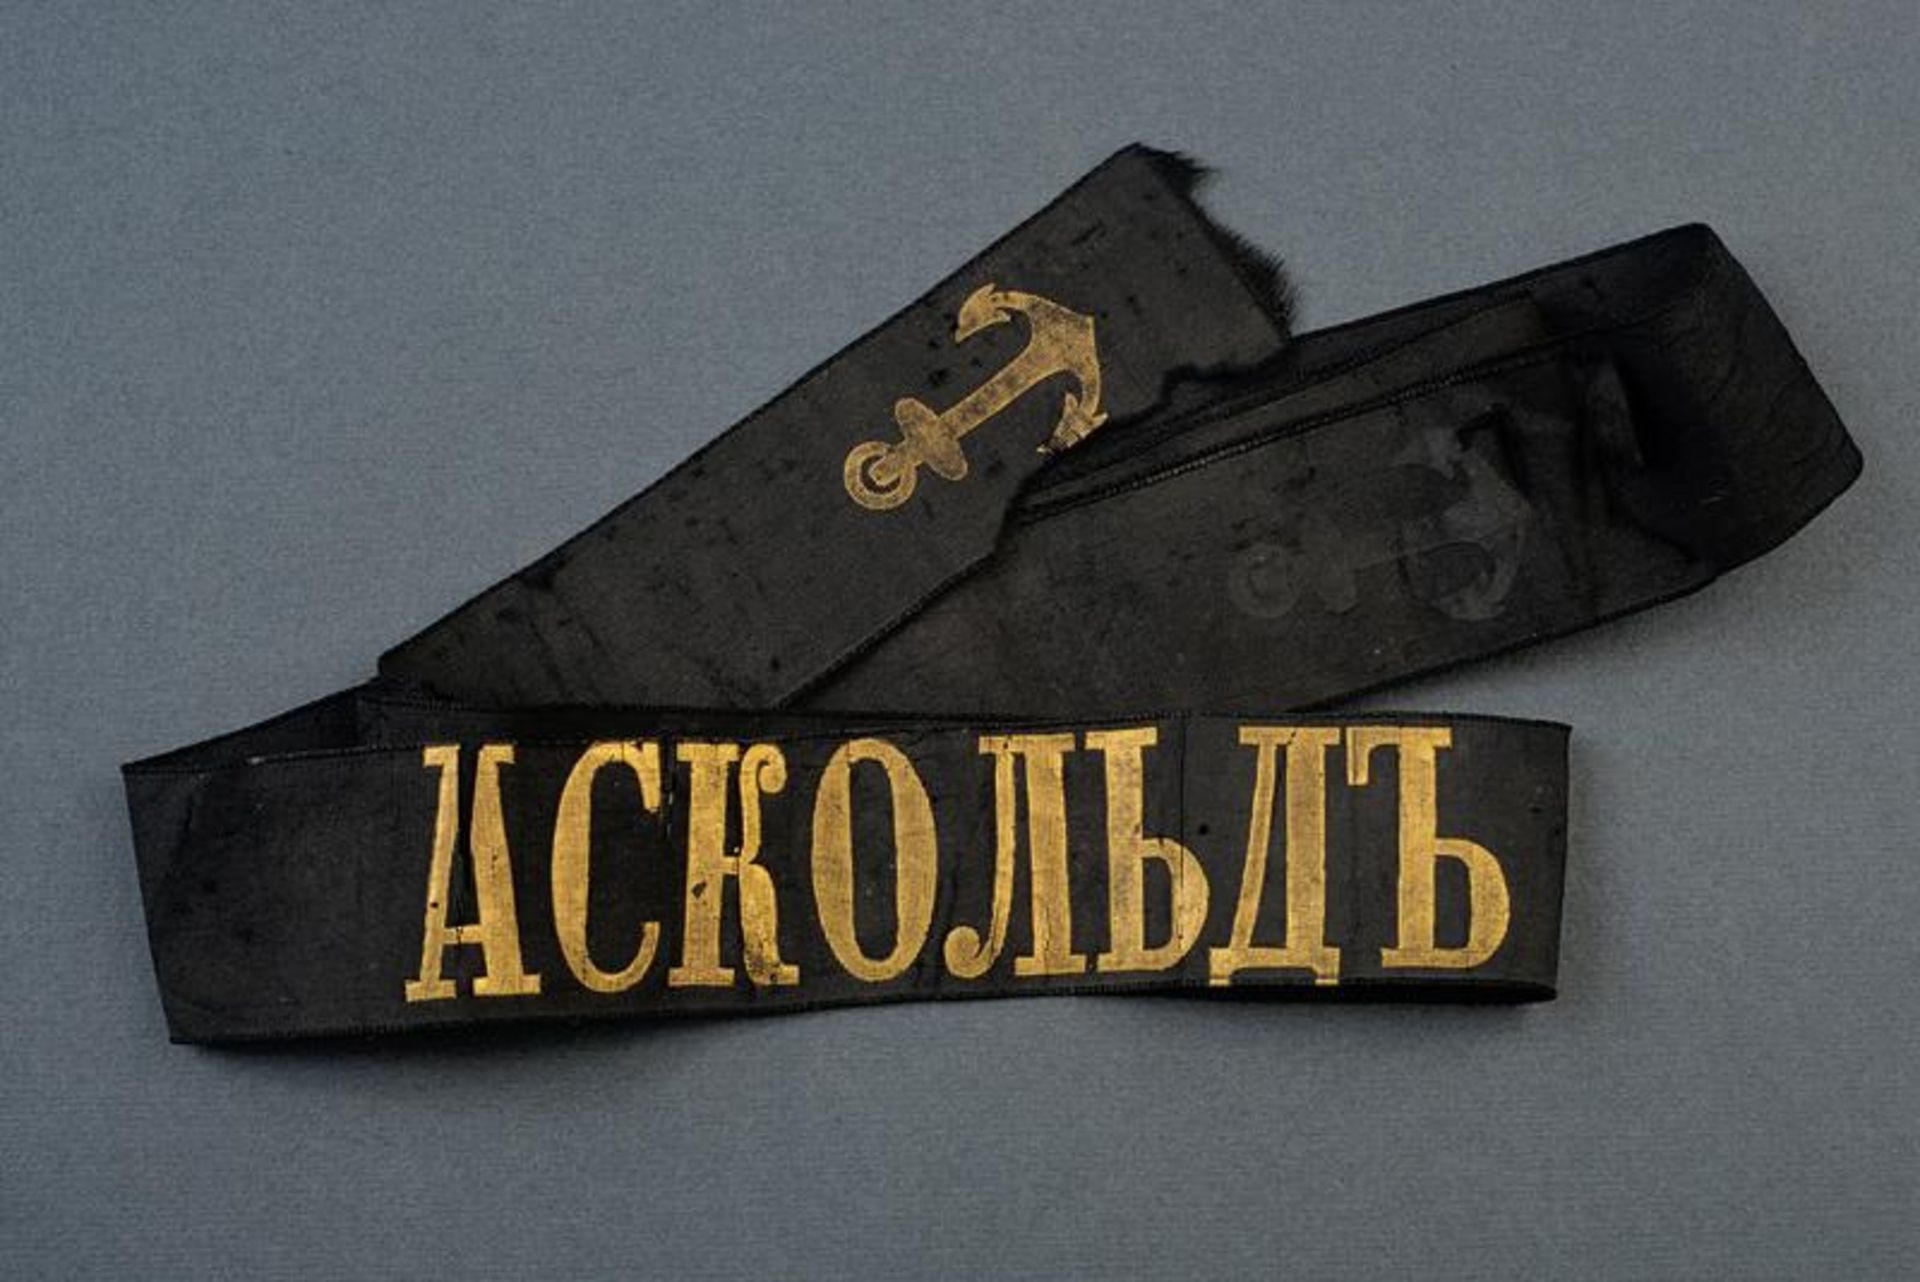 A navy cap ribbon from the Russian cruiser Askold